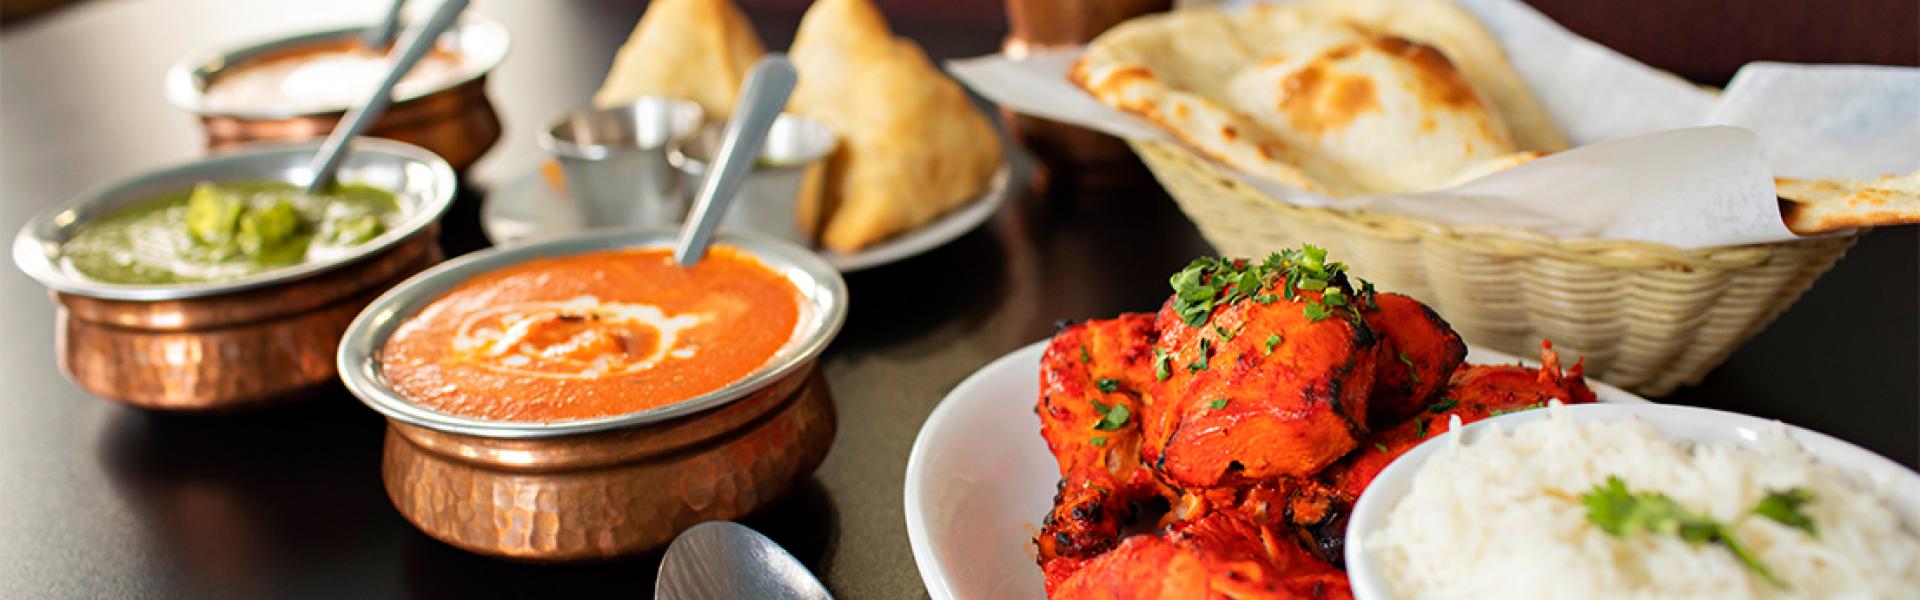 Serves a variety of vegetarian and non-vegetarian curries, samosas, platters with an authentic Indian taste. 